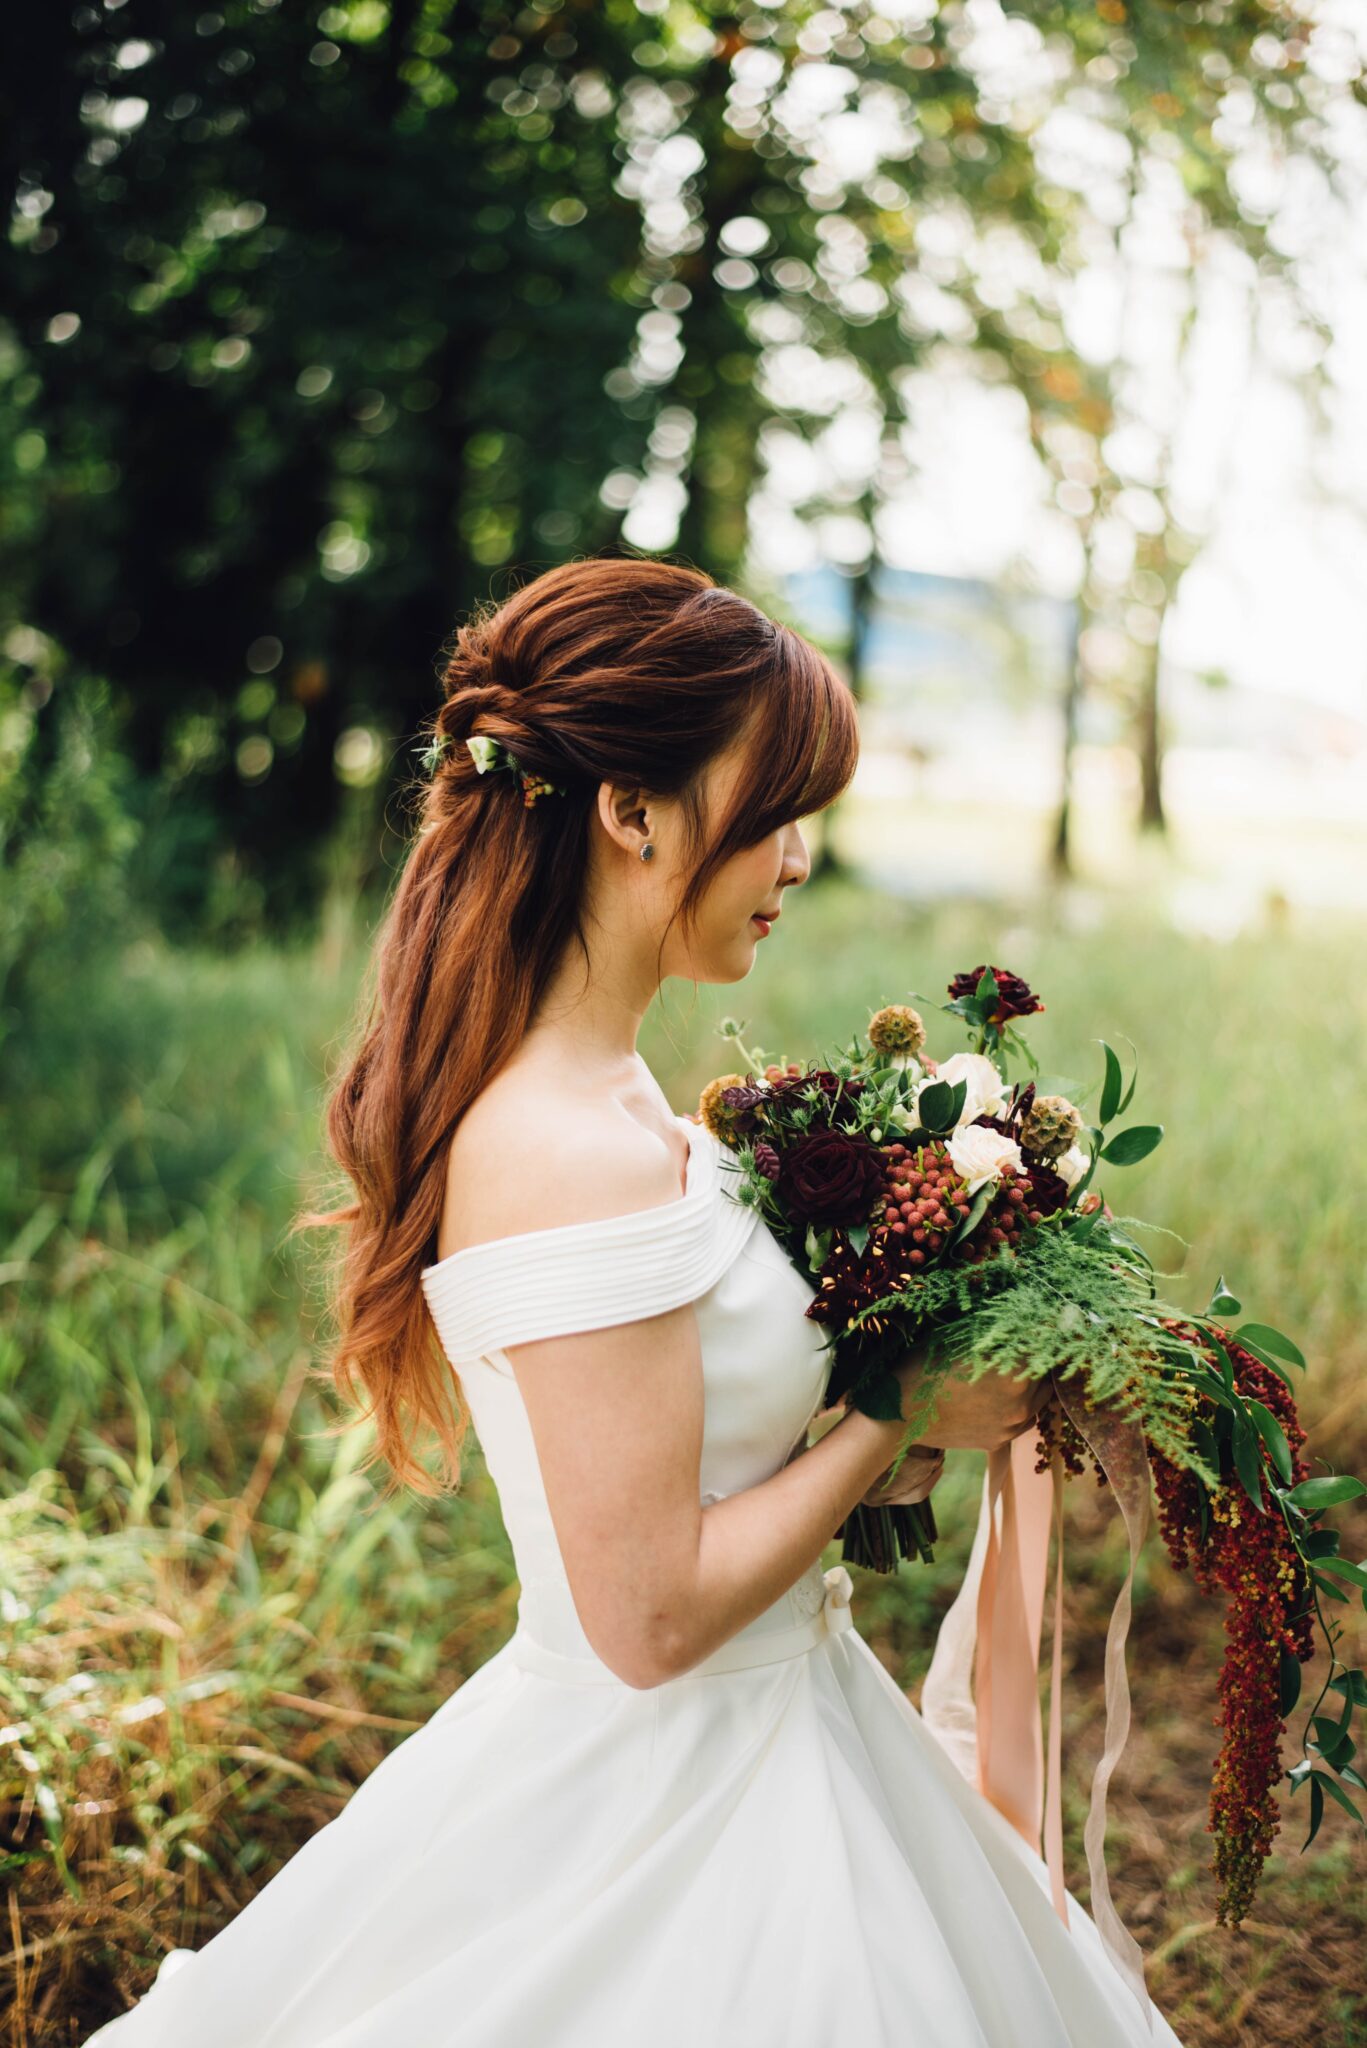 Capturing Beautiful Moments: Candid Wedding Photos by Andy